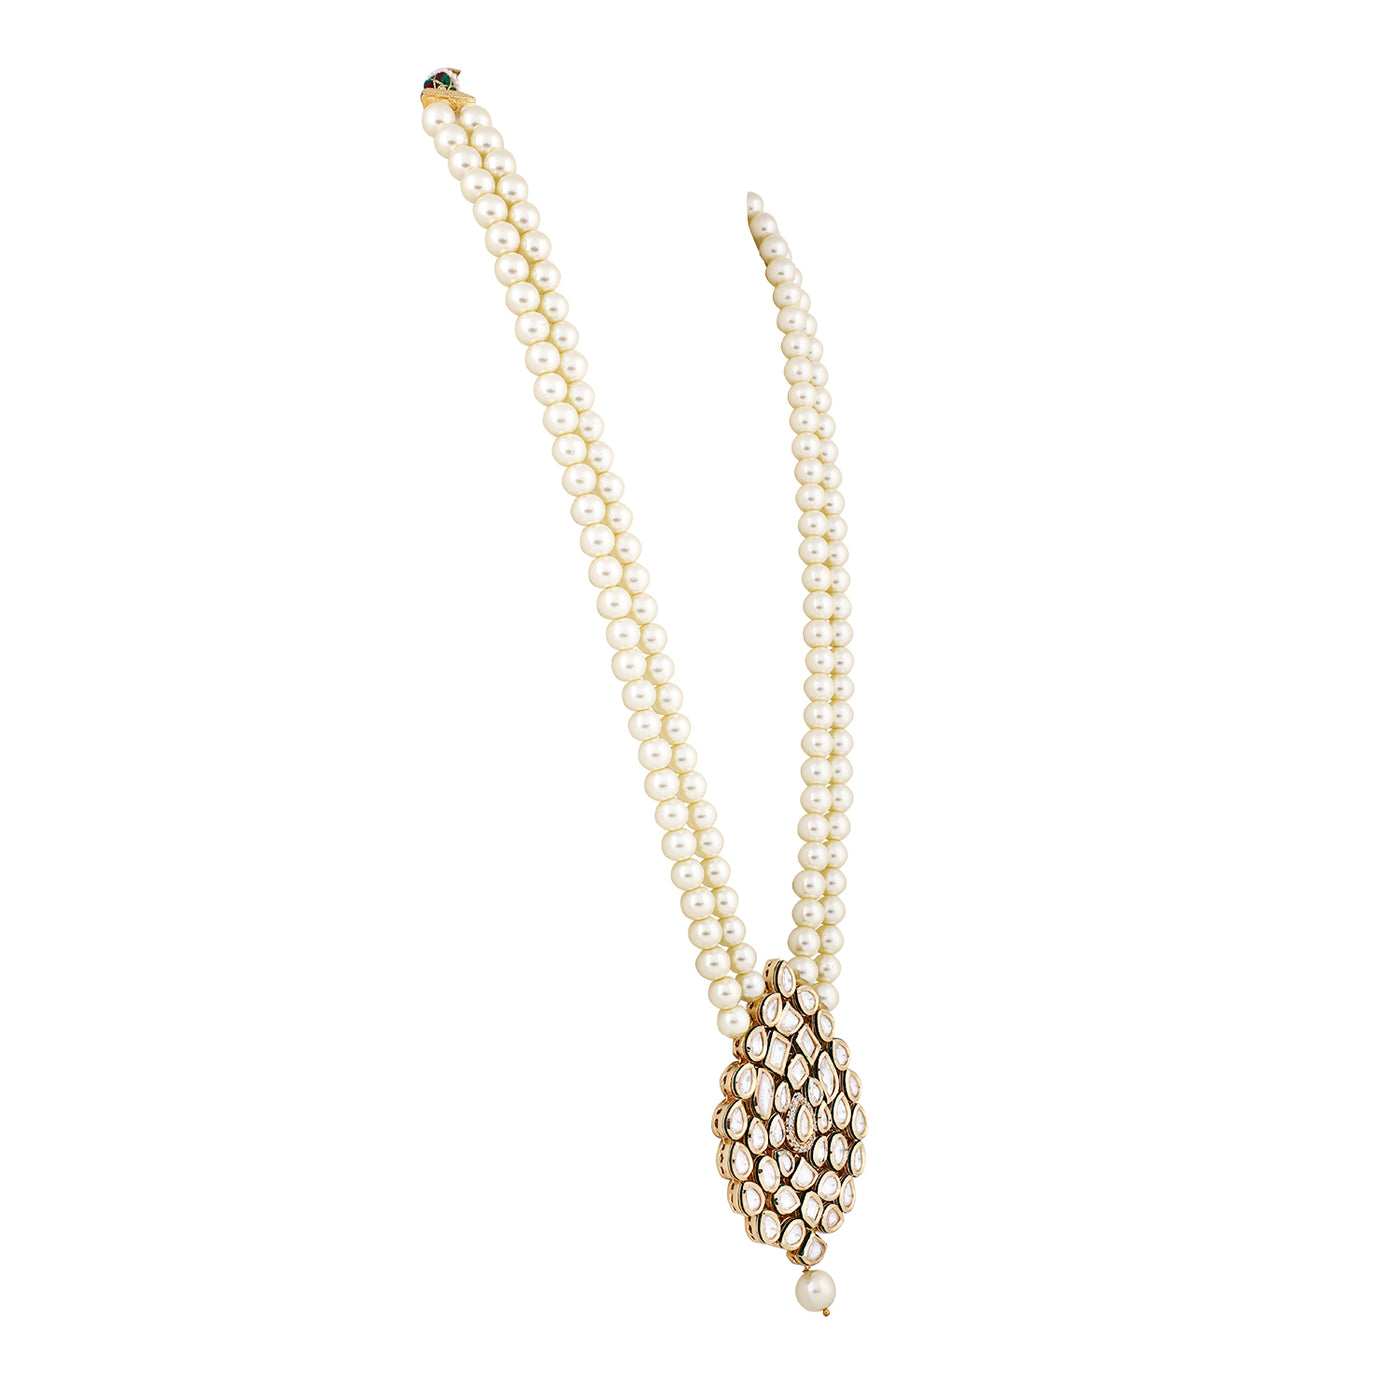 Pearled Polki Long Necklace